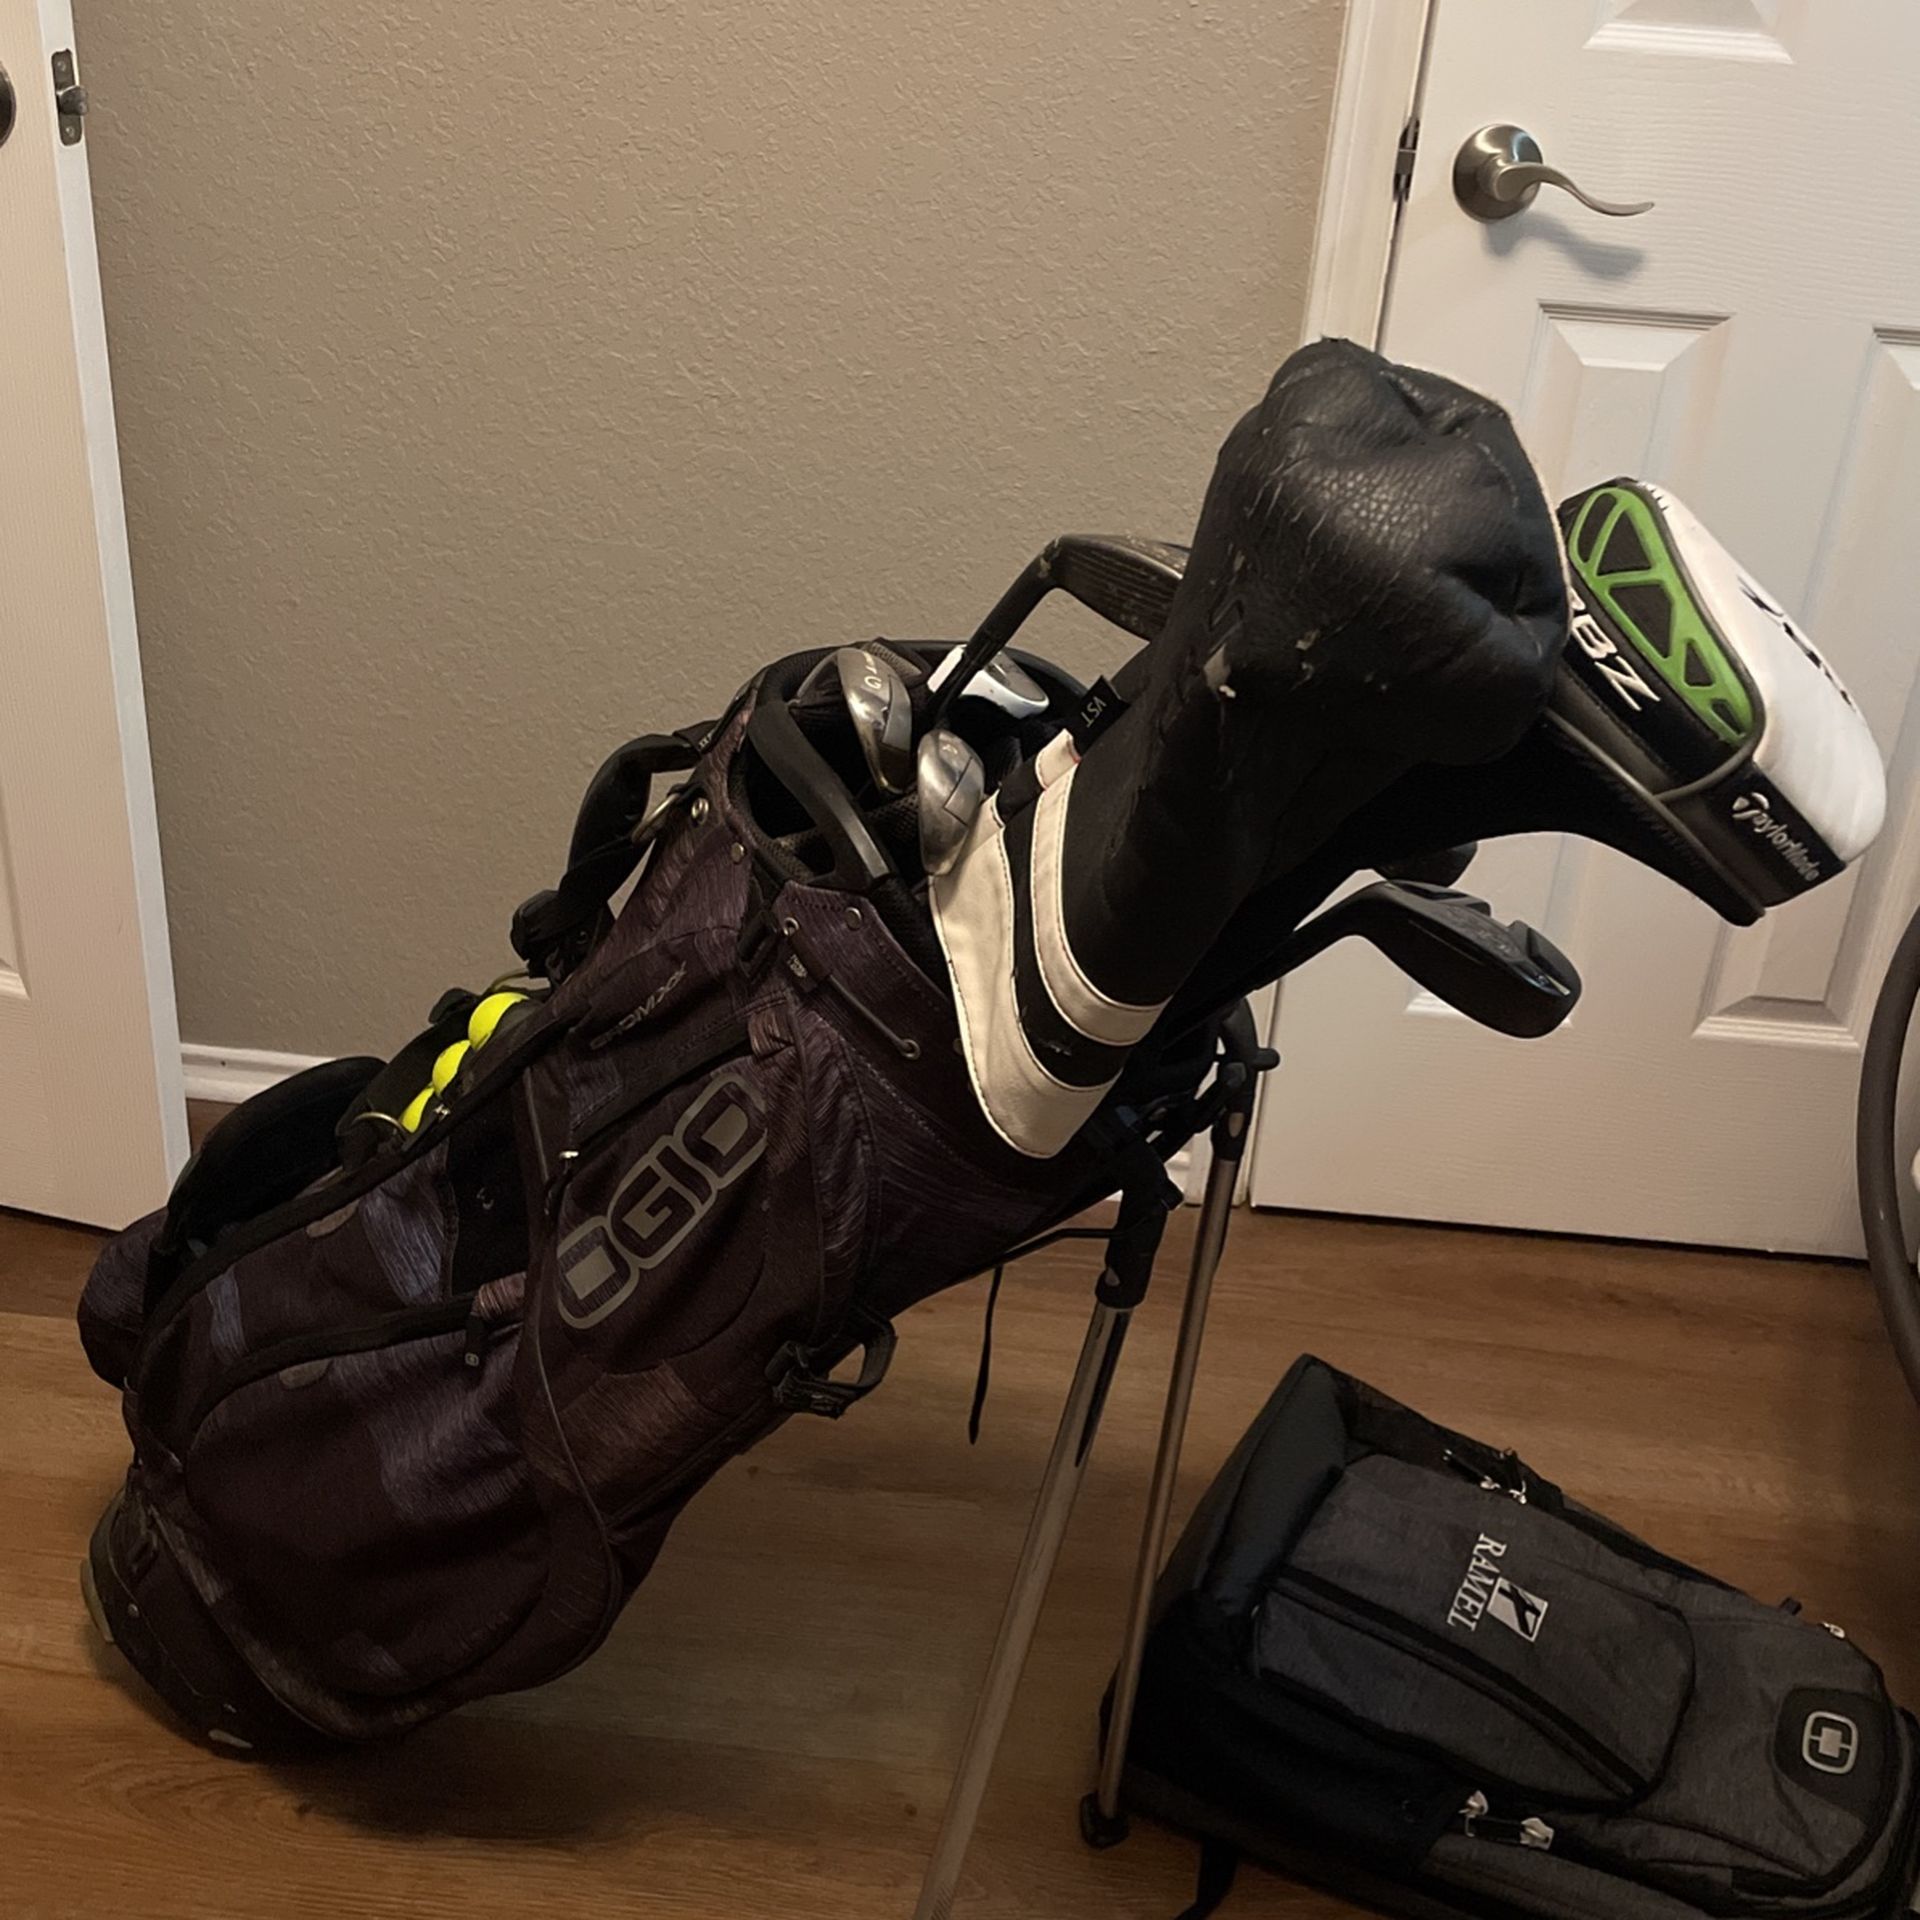 Golf Clubs With Ogio Bag $350 OBO